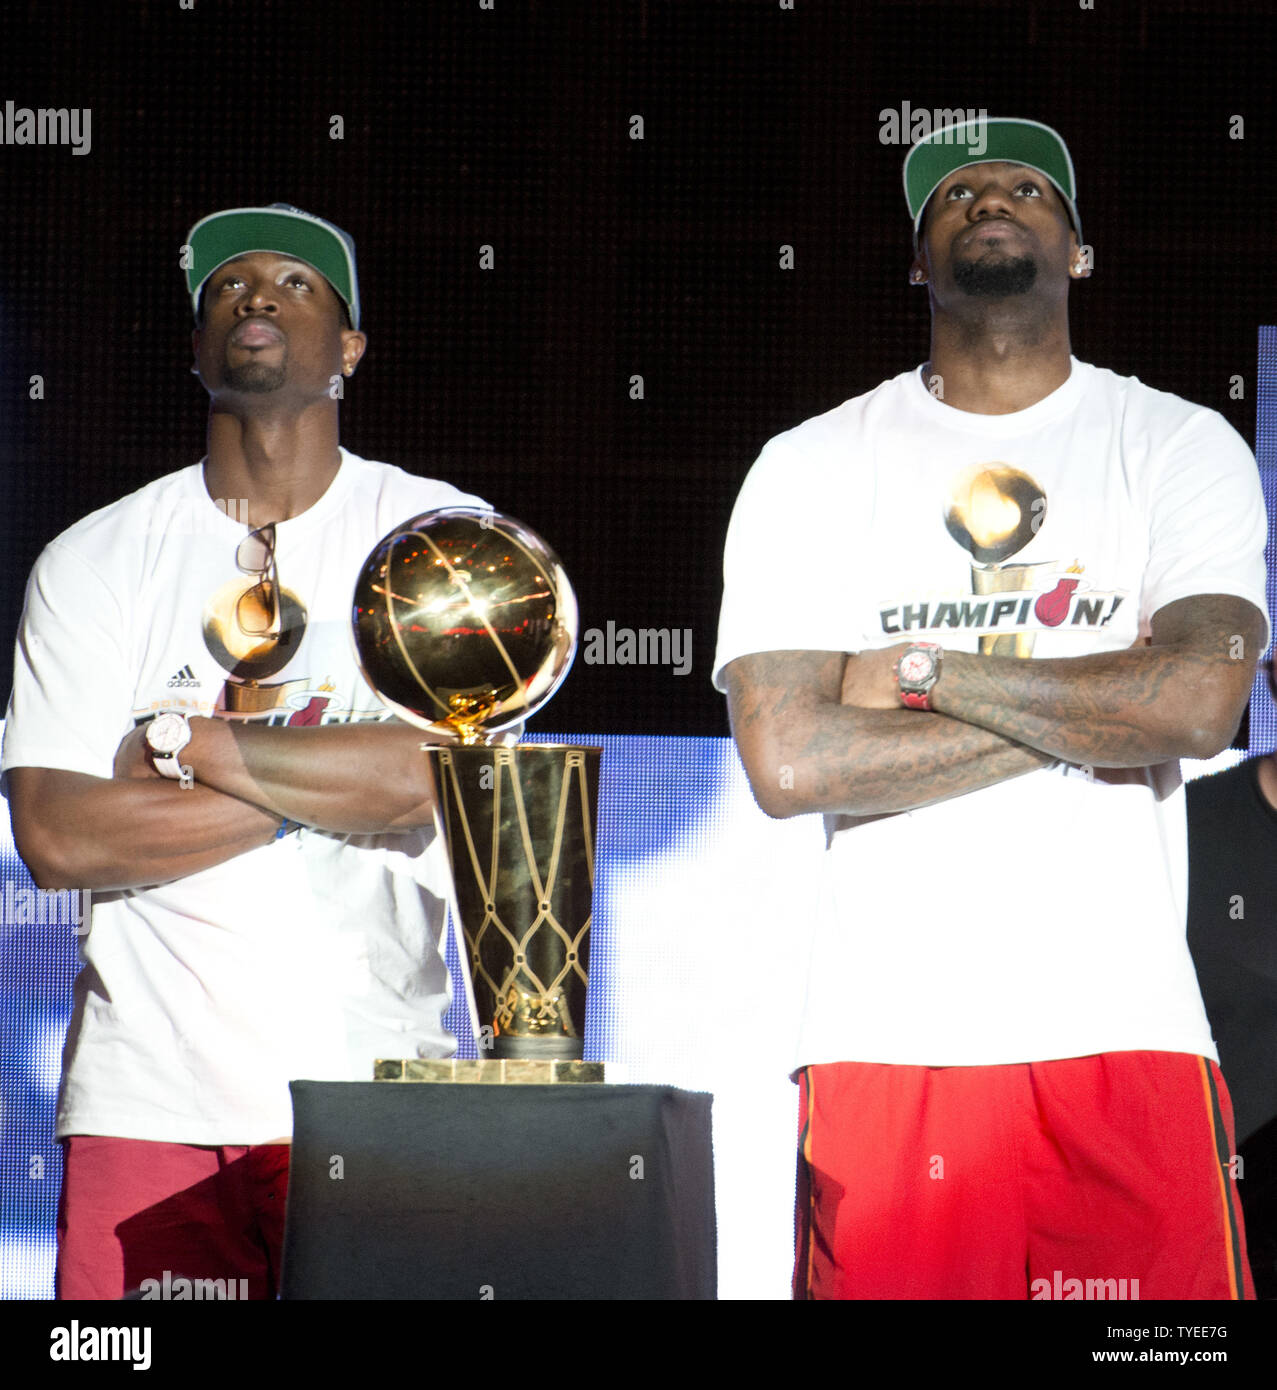 Lebron James (Right) and Dwyne Wade watch the replay of the last game during the celebration for the NBA 2012 Champions Miami Heat inside the American Airlines Arena Miami, Florida, June 25,